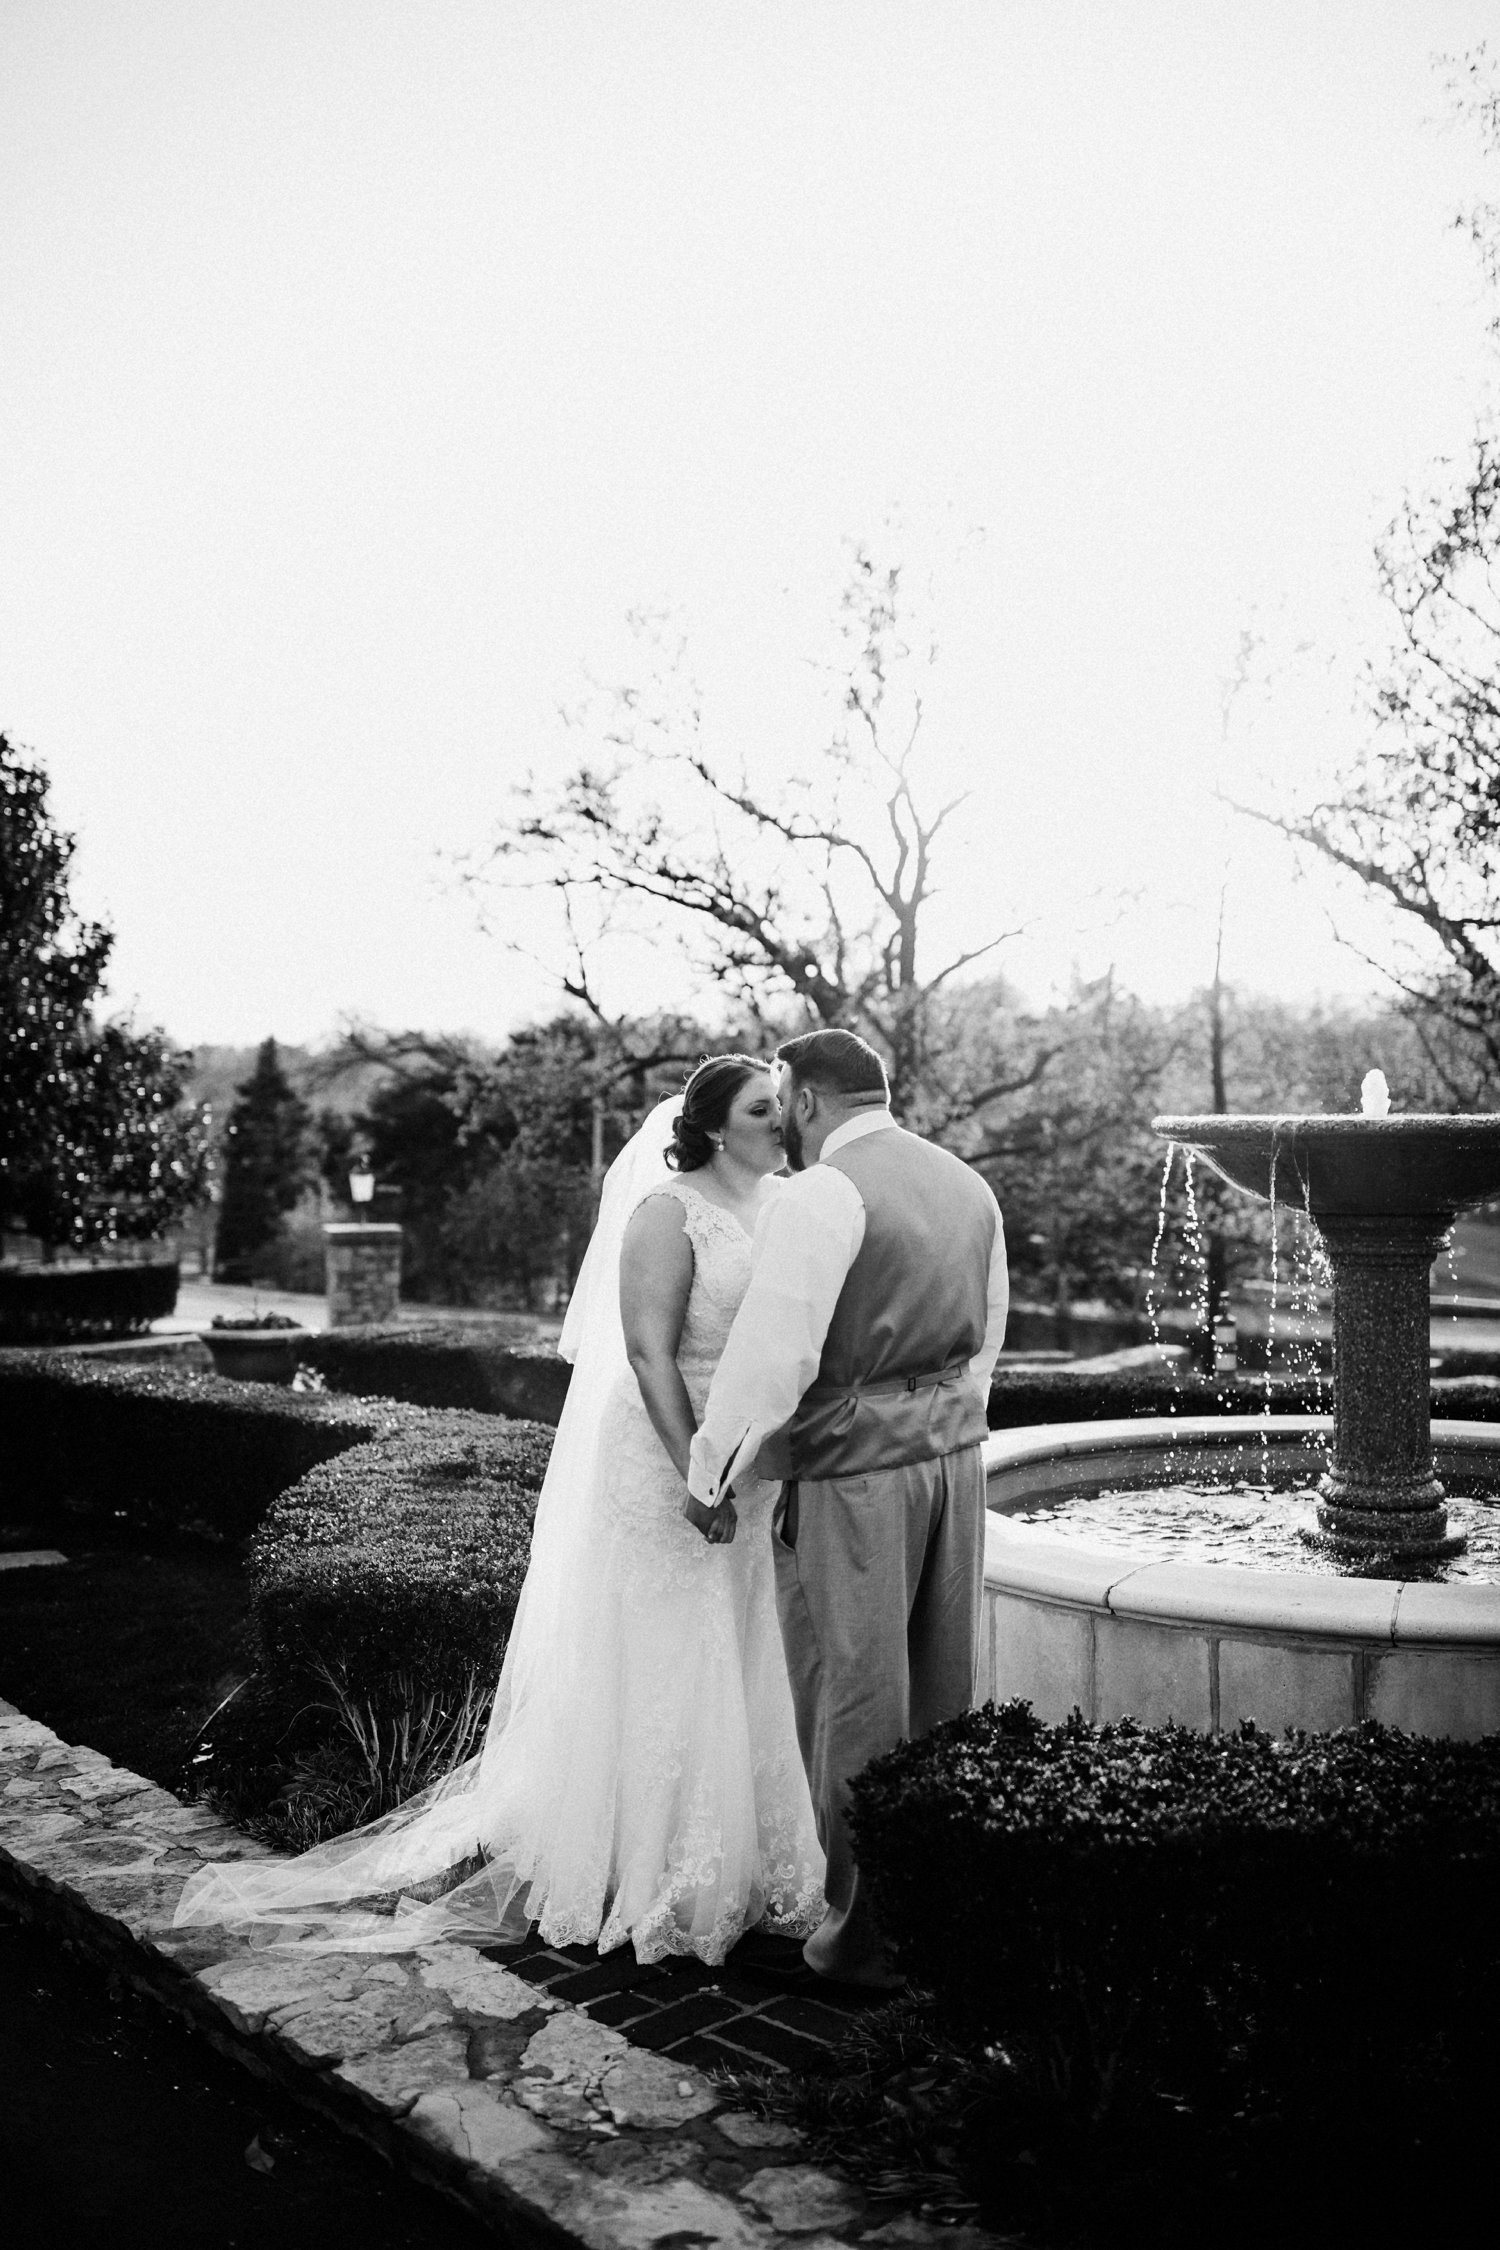  images by feliciathephotographer.com | destination wedding photographer | spring time | carriage club | exclusive | golden hour | bridal portraits | sunset | grey suit | jos a bank | white beaded lace dress | long veil | stella york | fountain | black and white | 